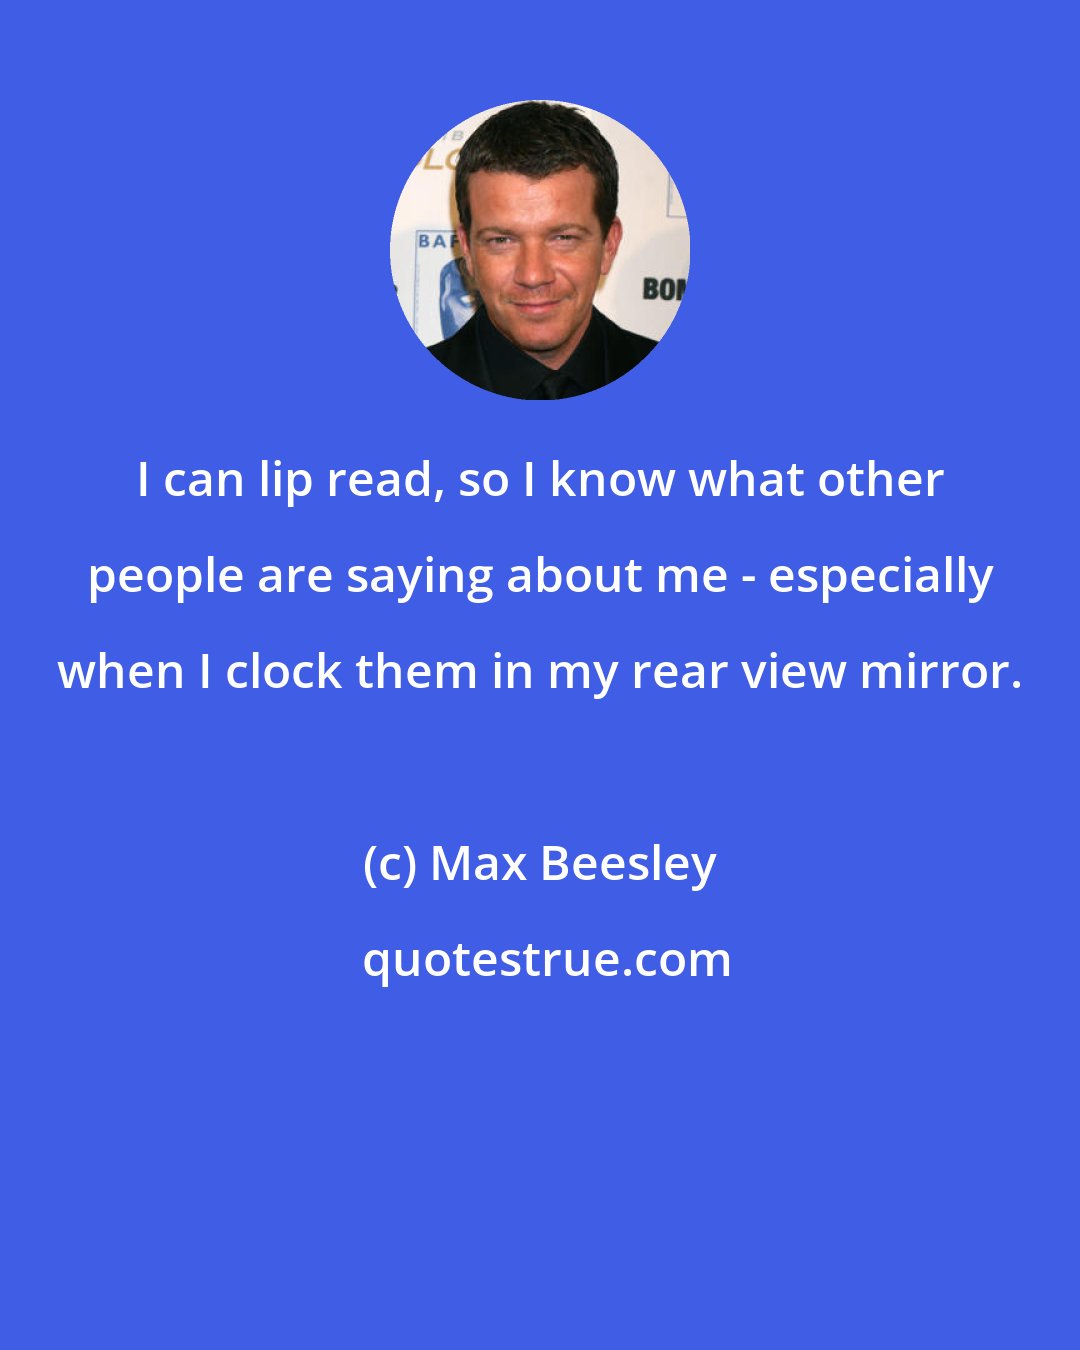 Max Beesley: I can lip read, so I know what other people are saying about me - especially when I clock them in my rear view mirror.